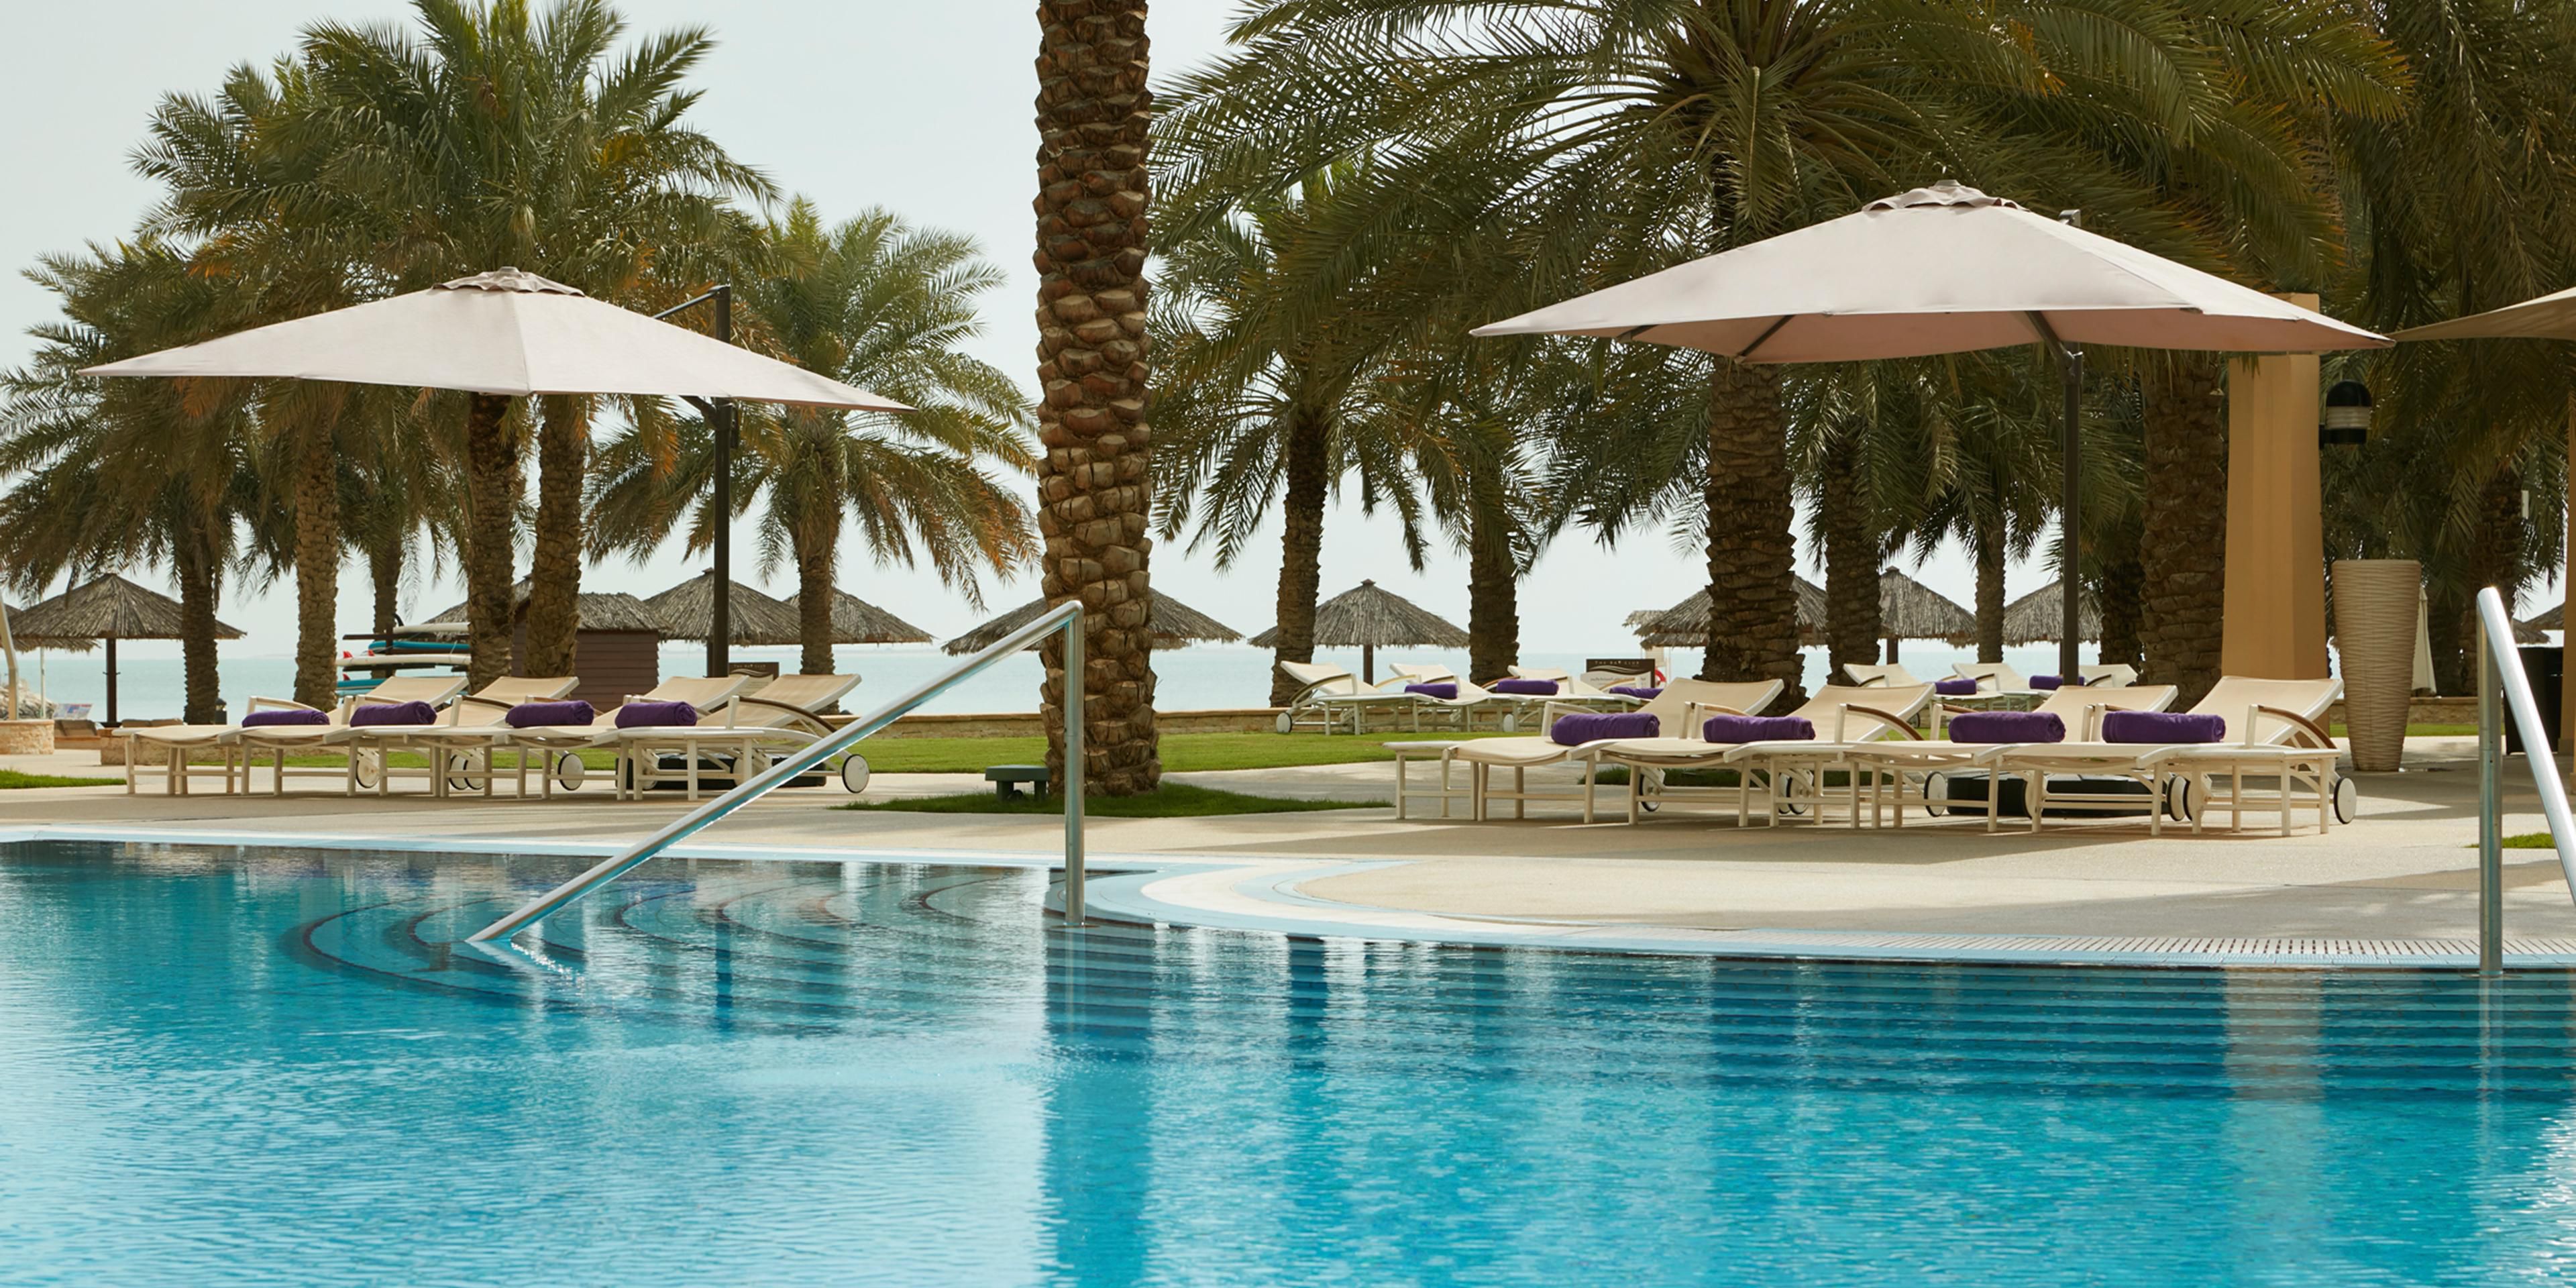 Soak in the sunshine at Doha's longest private beach, or relax by the pool. The Bay Club offers endless recreation options like a state-of-the-art 24-hour gym, tennis and squash courts, fitness classes, watersports, and more. 